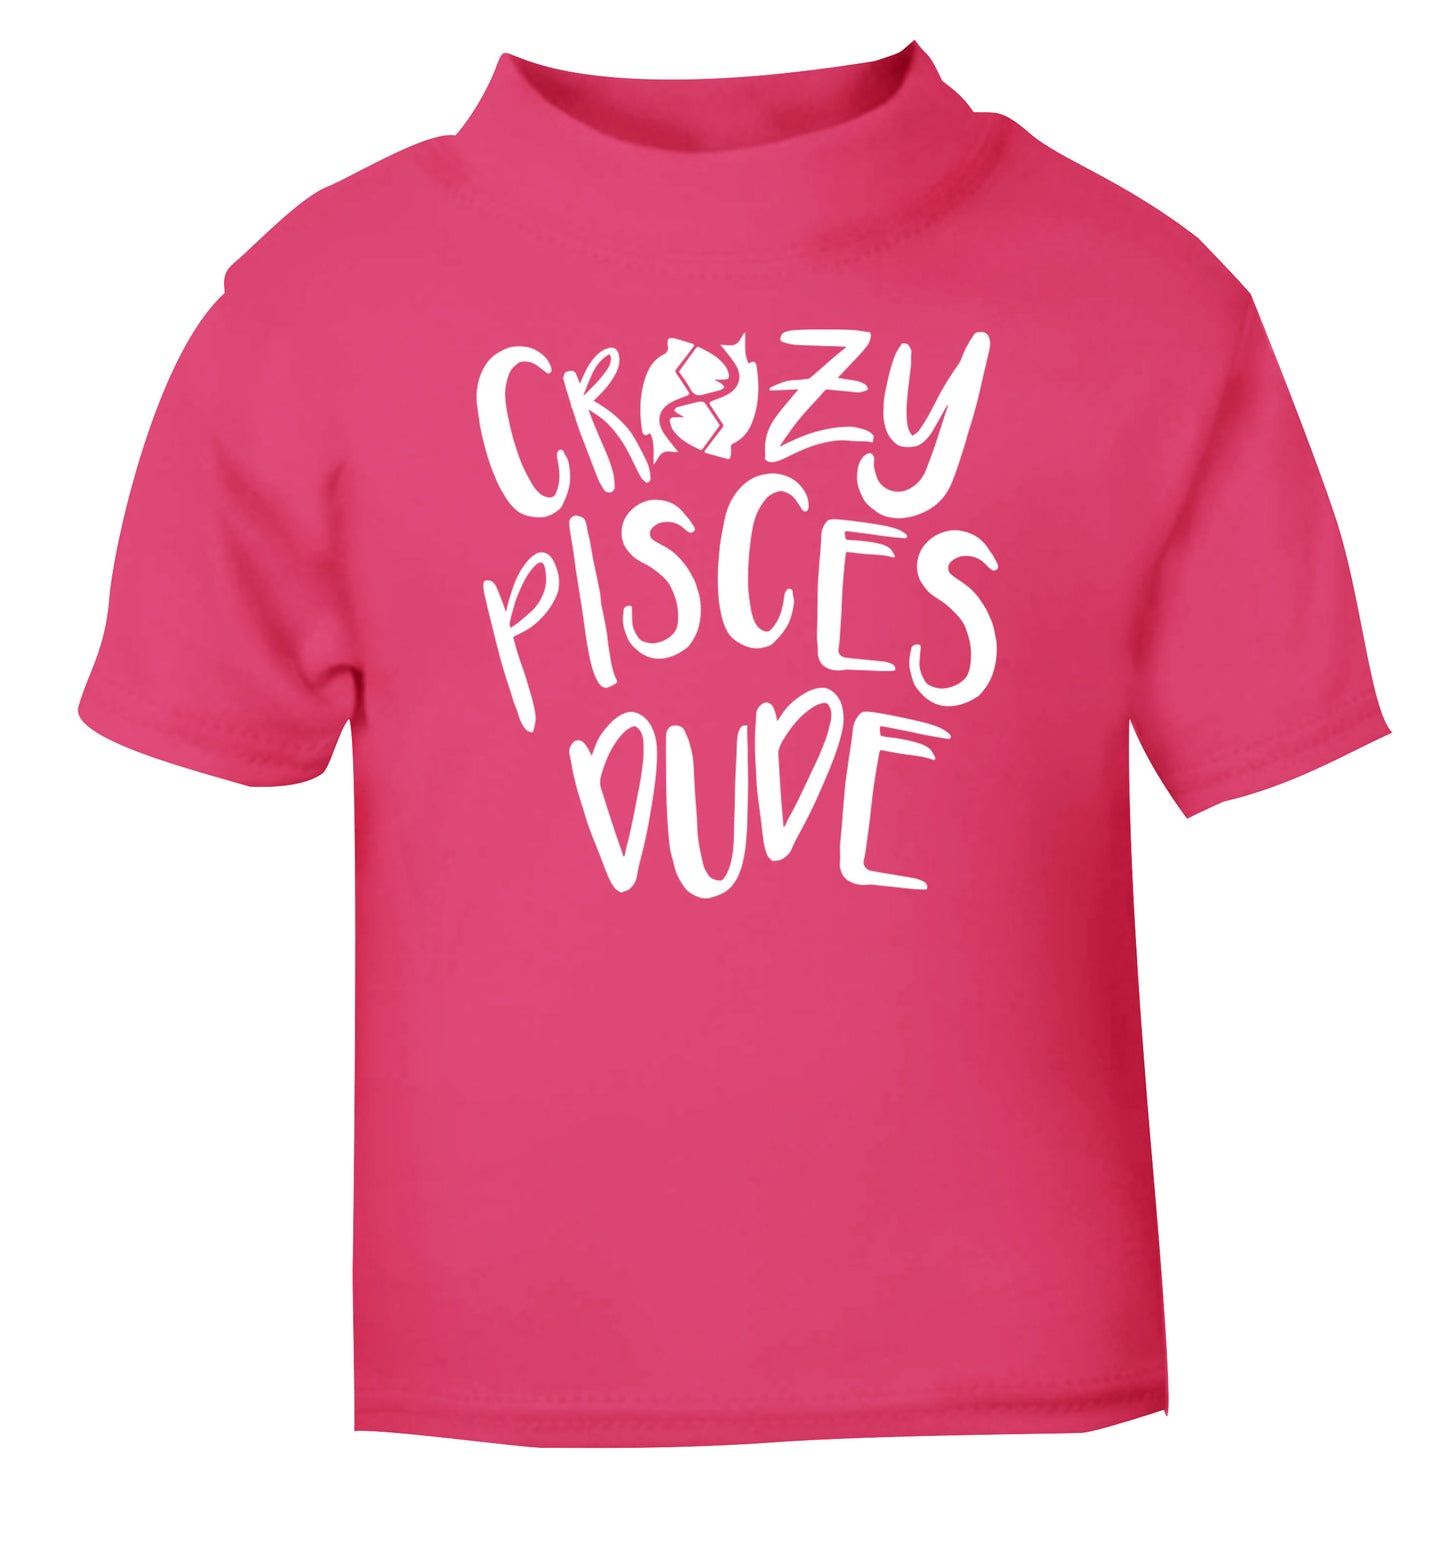 Crazy pisces dude pink Baby Toddler Tshirt 2 Years